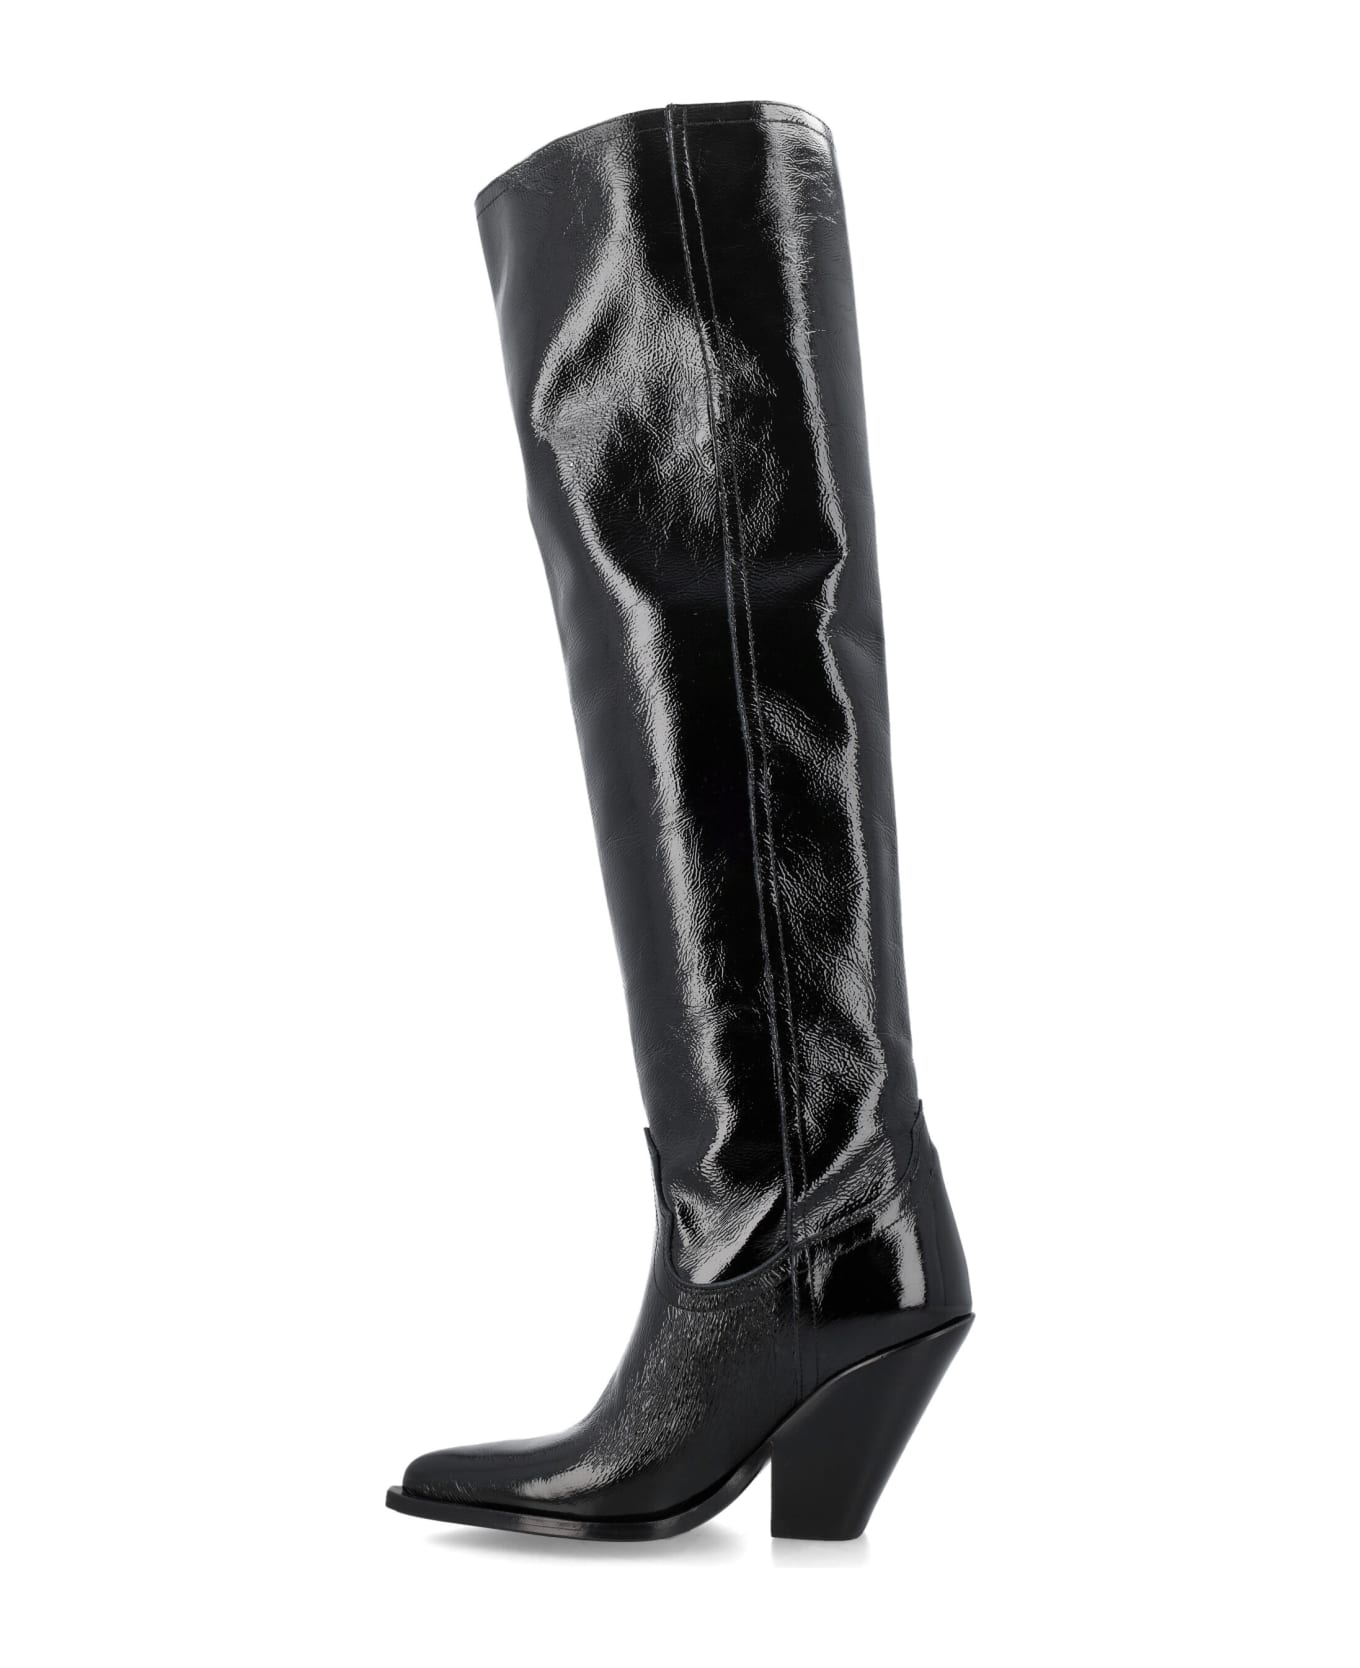 Sonora Acapulco Naplack Over-the-knee Boots - BLACK